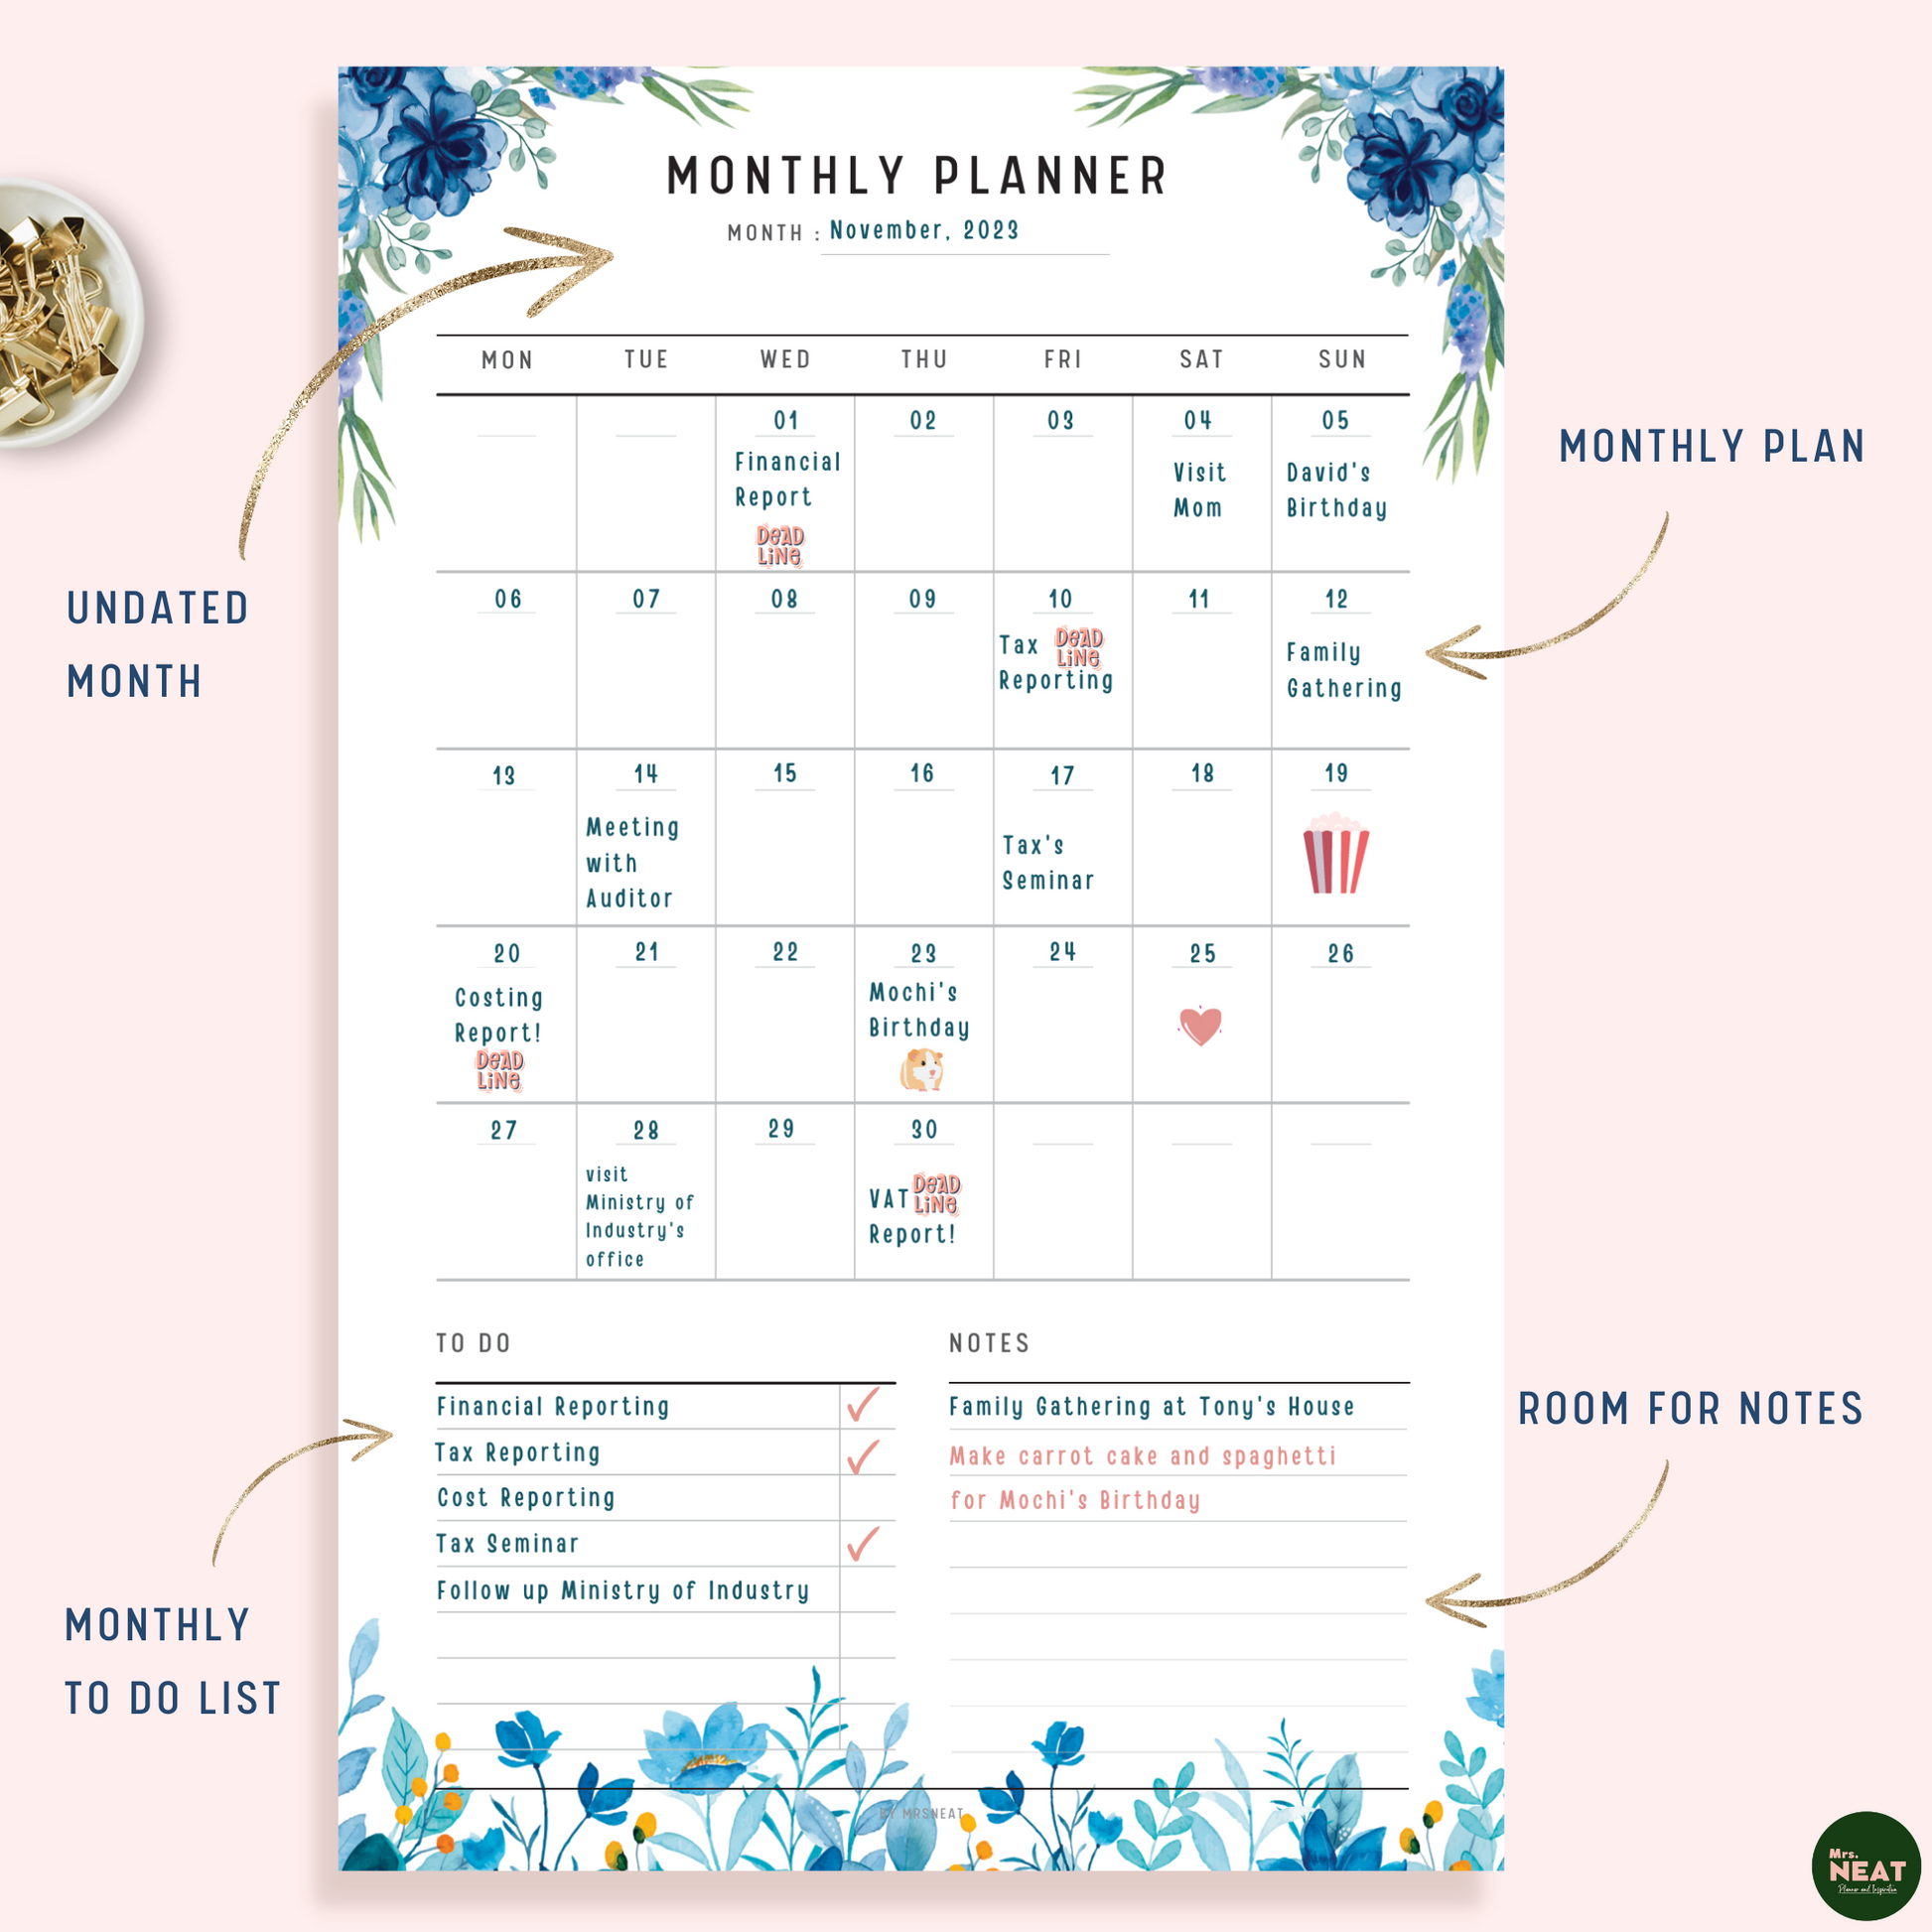 Minimalist Floral Monthly Planner with 35 box for each day and room for To Do List and Notes